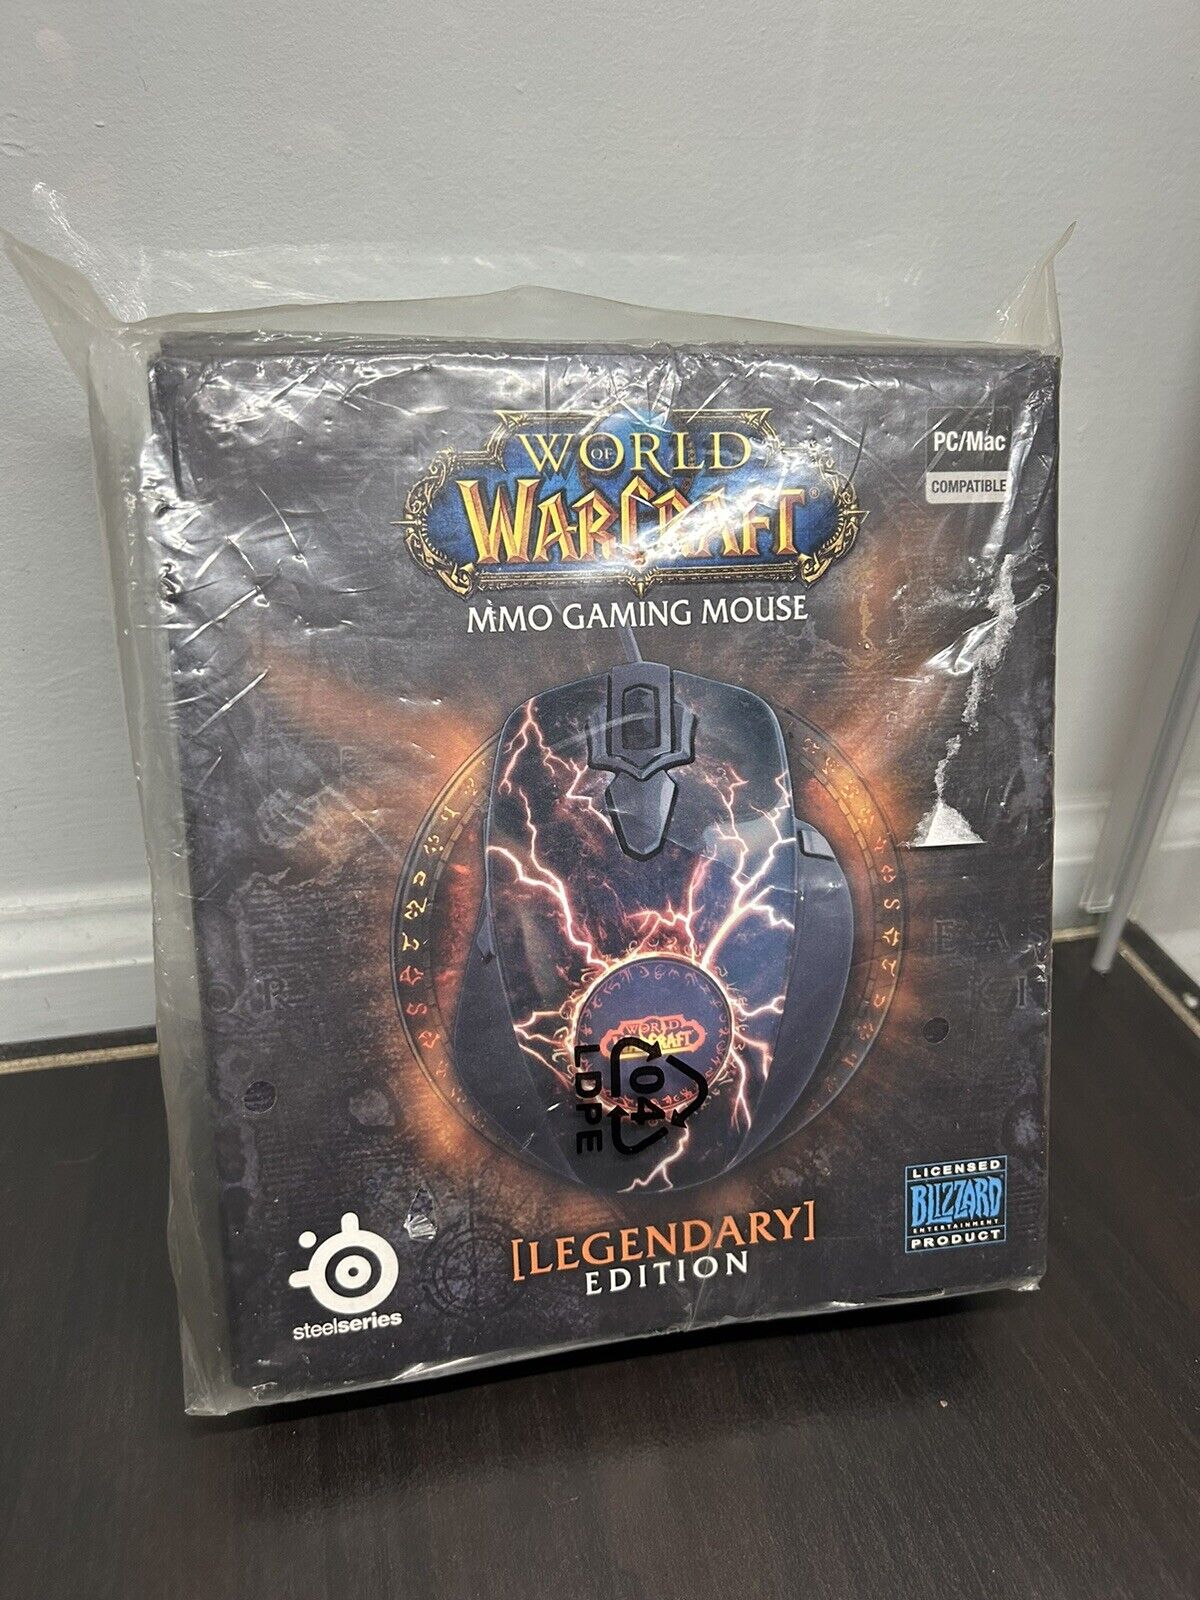 New Steelseries World of Warcraft Gaming Mouse Legendary Edition - SEALED IN BAG